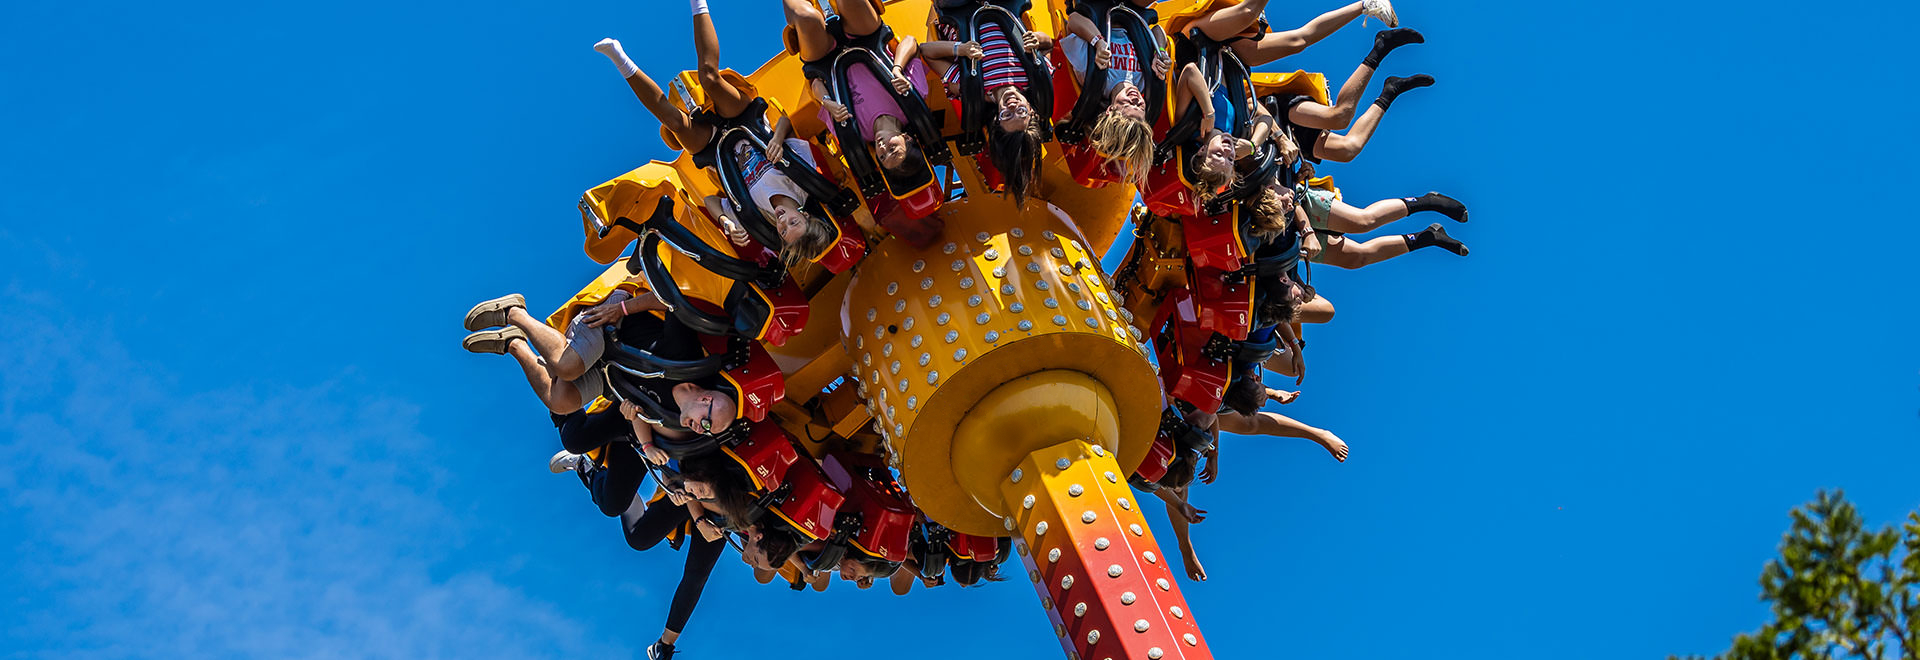 Guest riding Chaos during daytime.